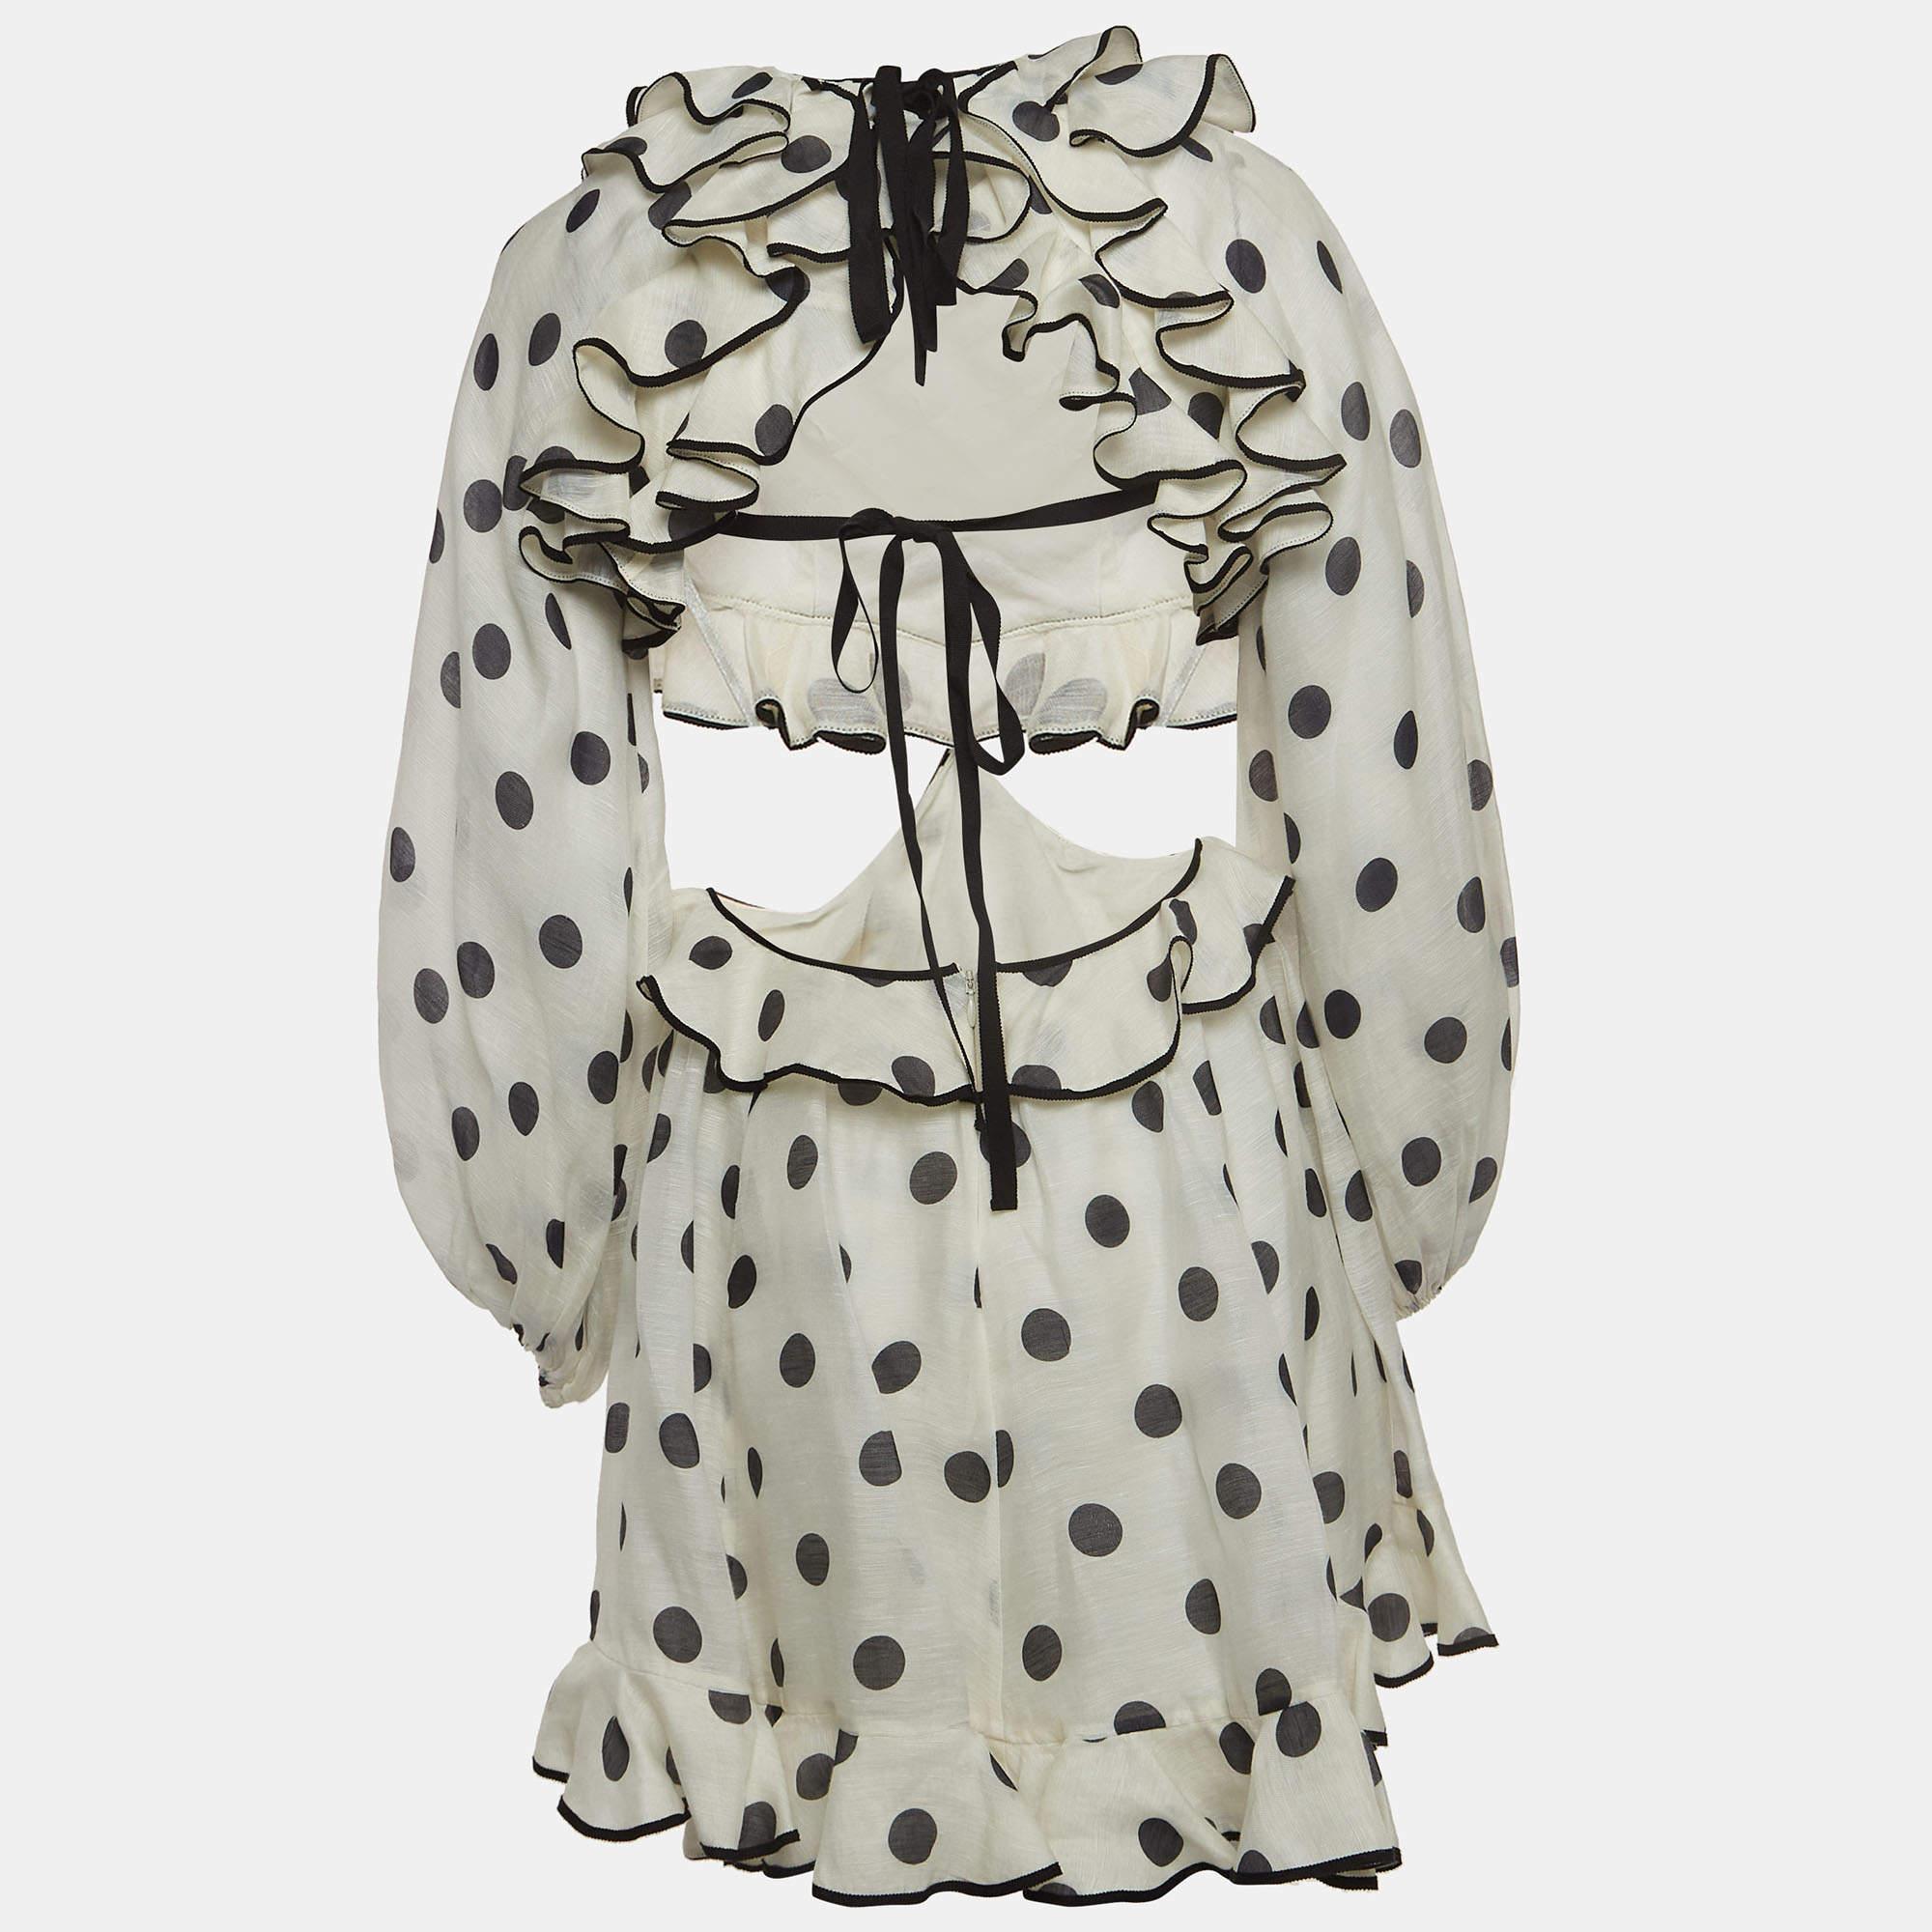 This Zimmermann mini dress brings elegant details and a chic silhouette. Featuring polka dots and cut-outs, this dress is a winner with flats as well as heels. It is made from the finest materials and is bound to give you comfort.

